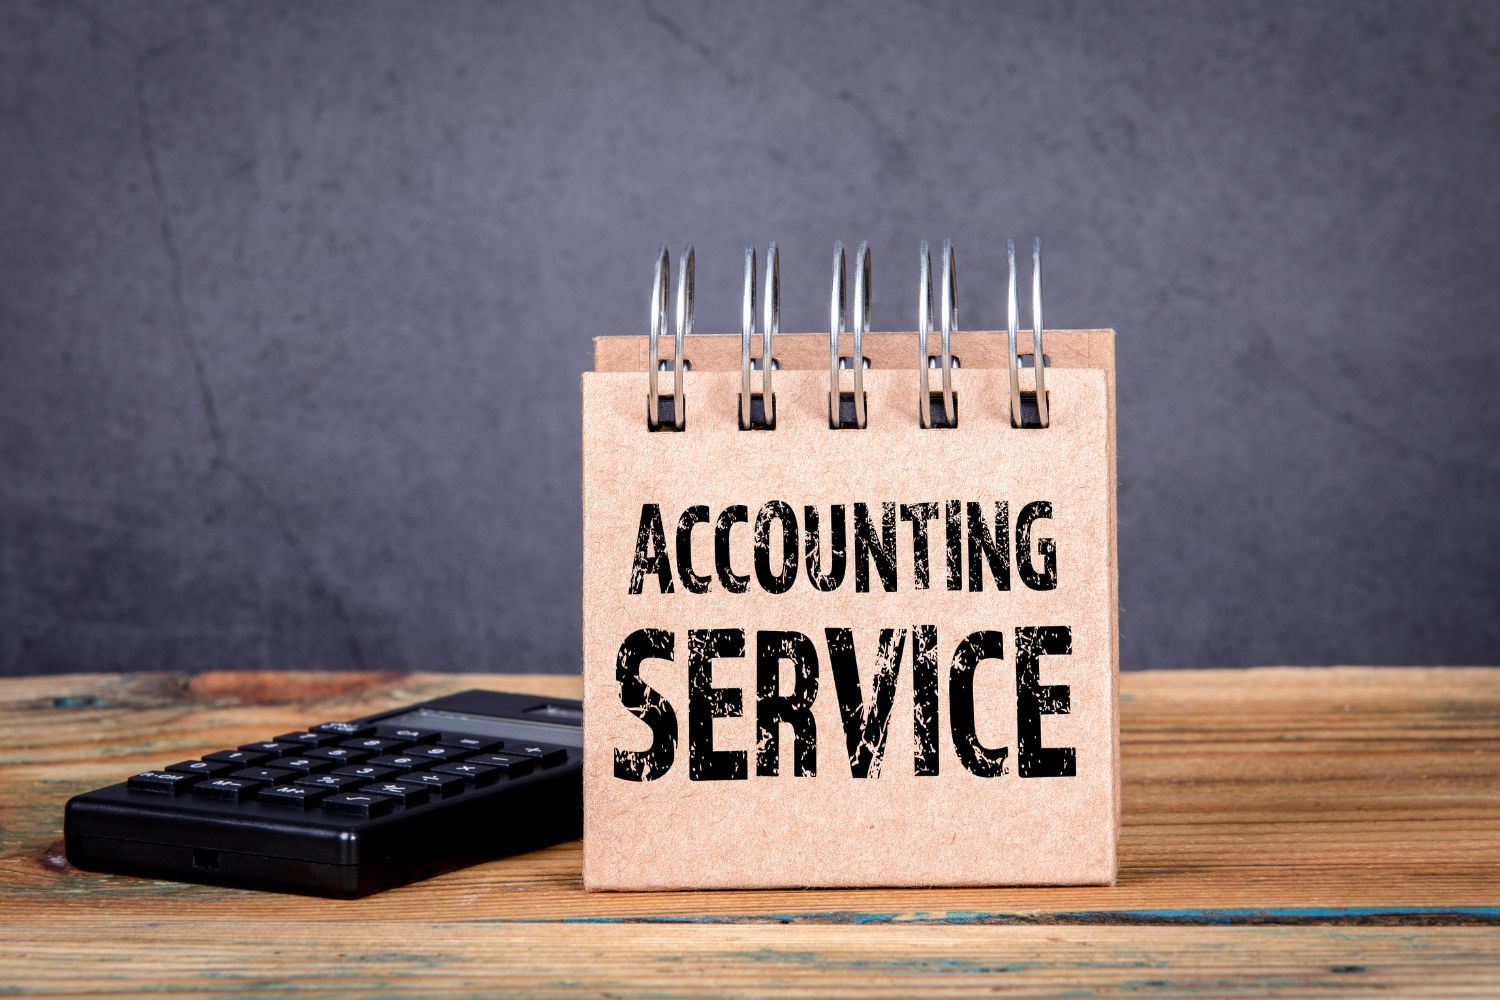 Why hire accounting services?